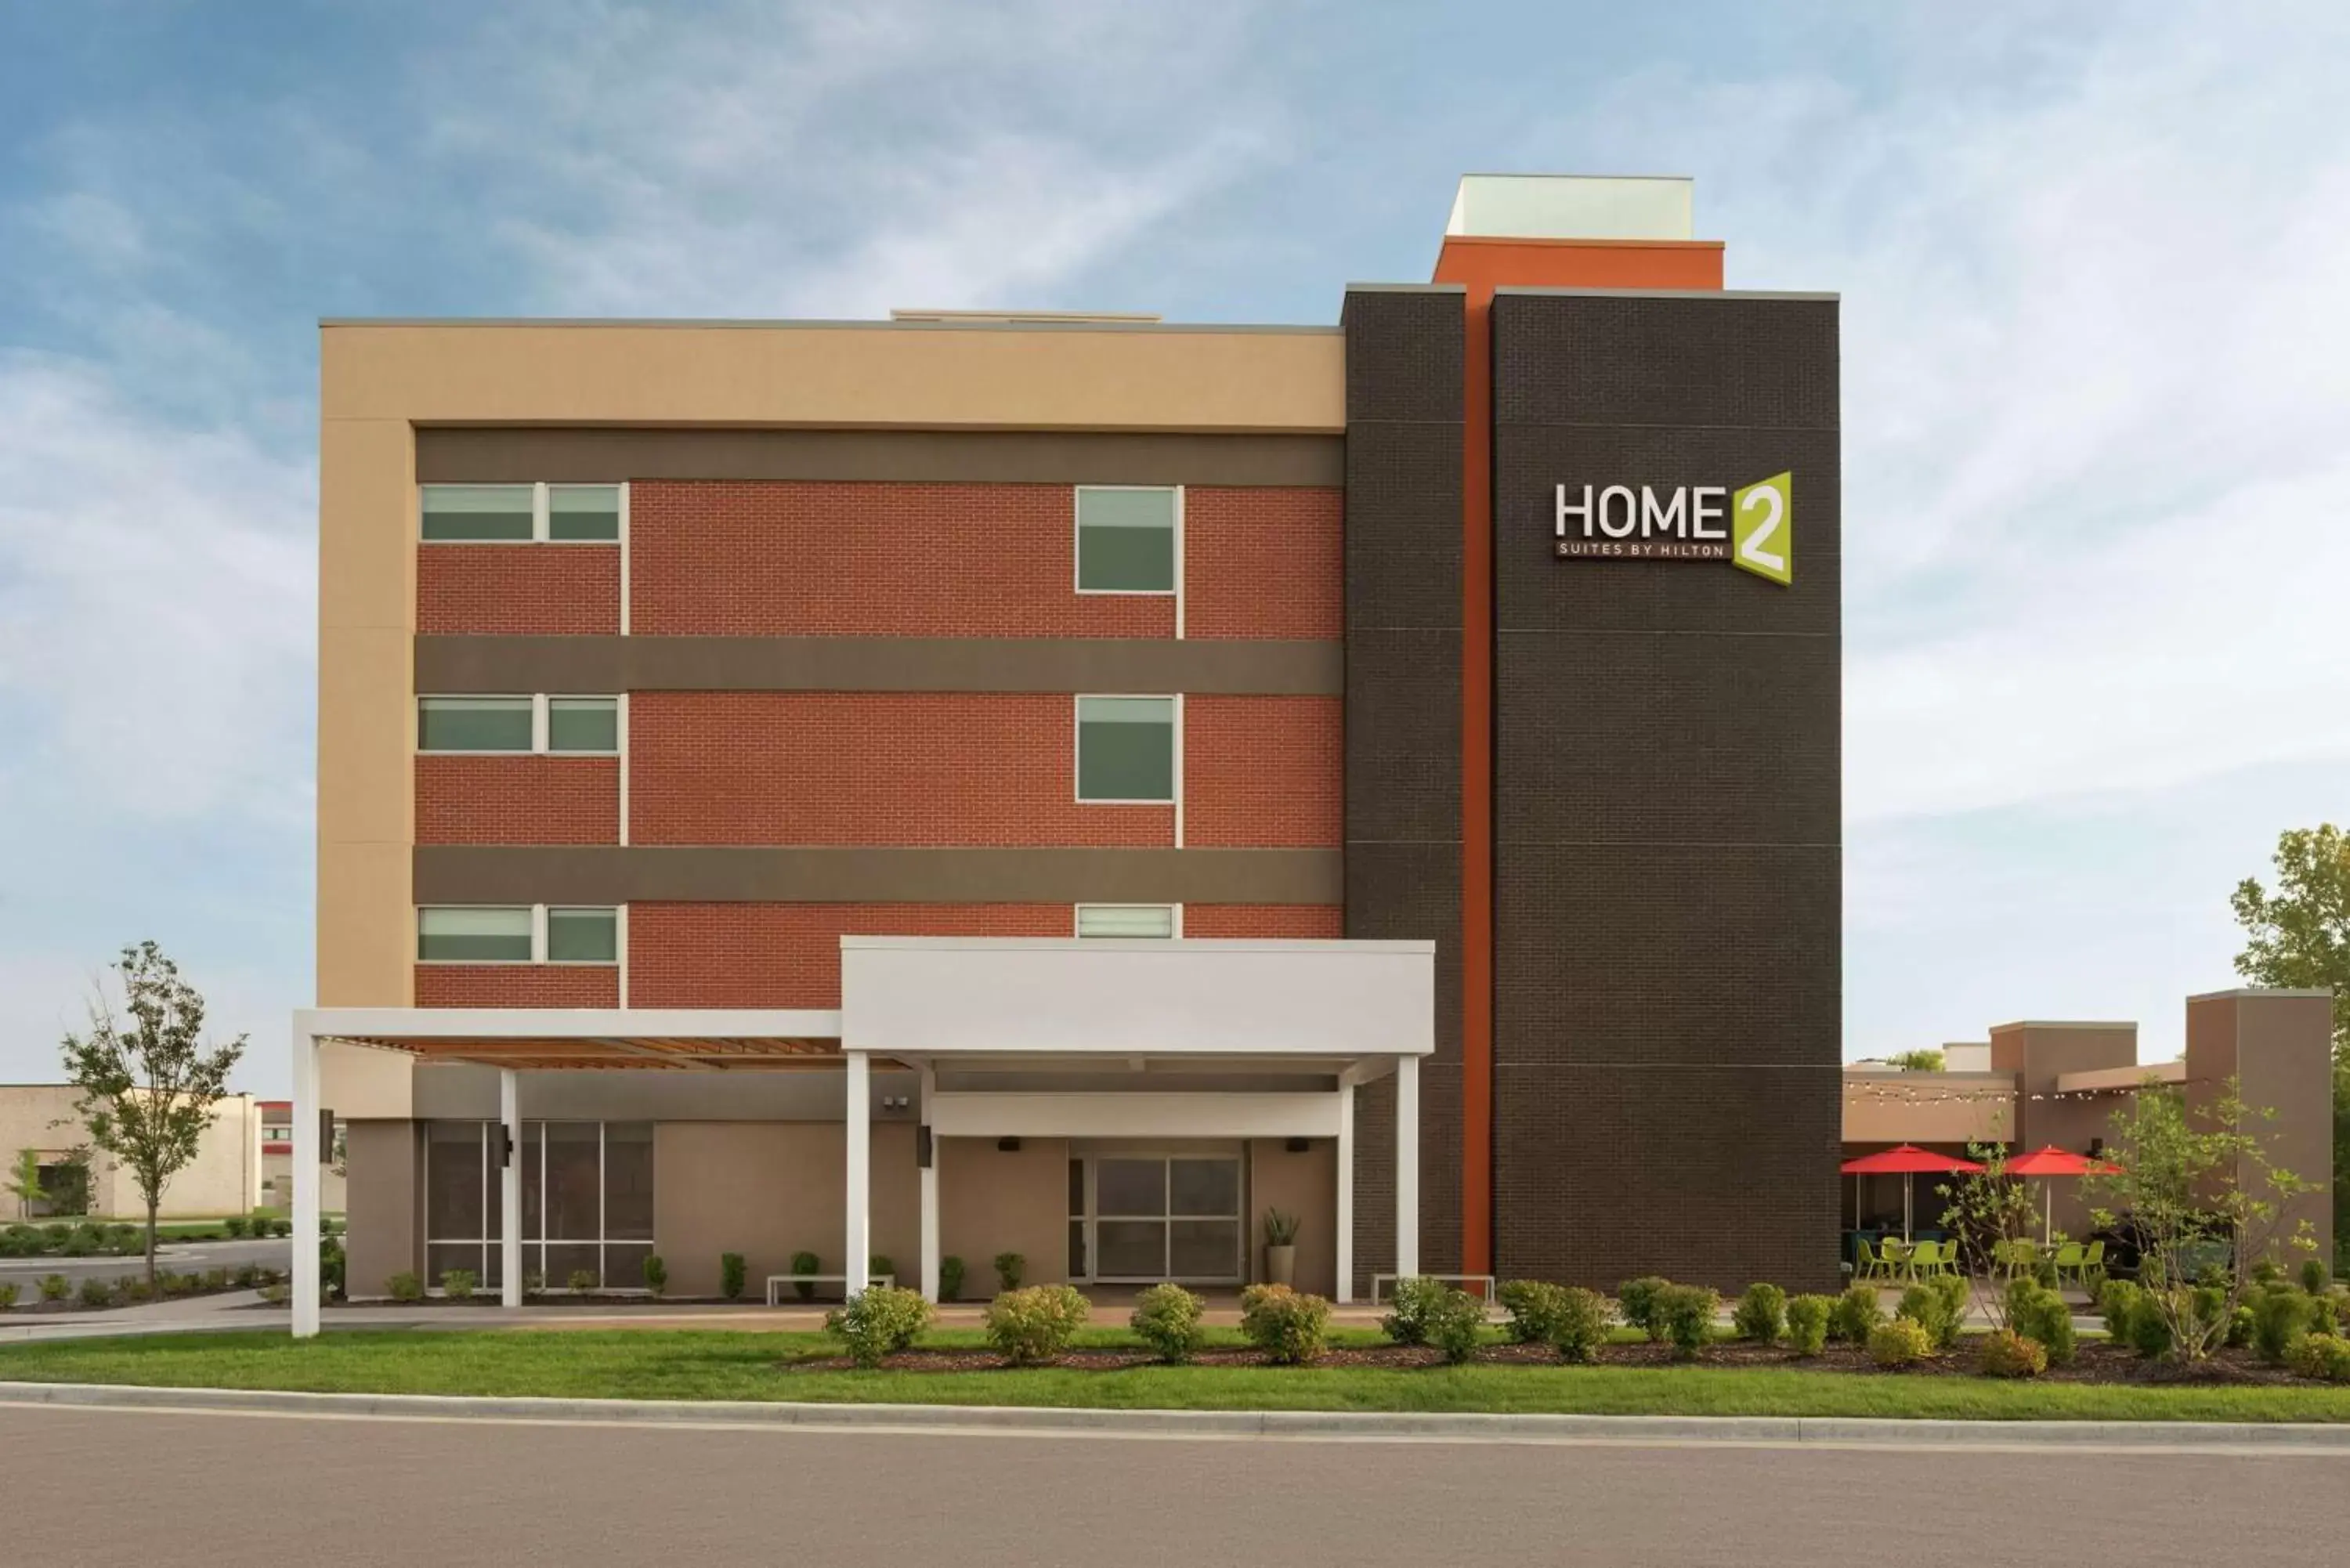 Property Building in Home2 Suites By Hilton Overland Park, Ks